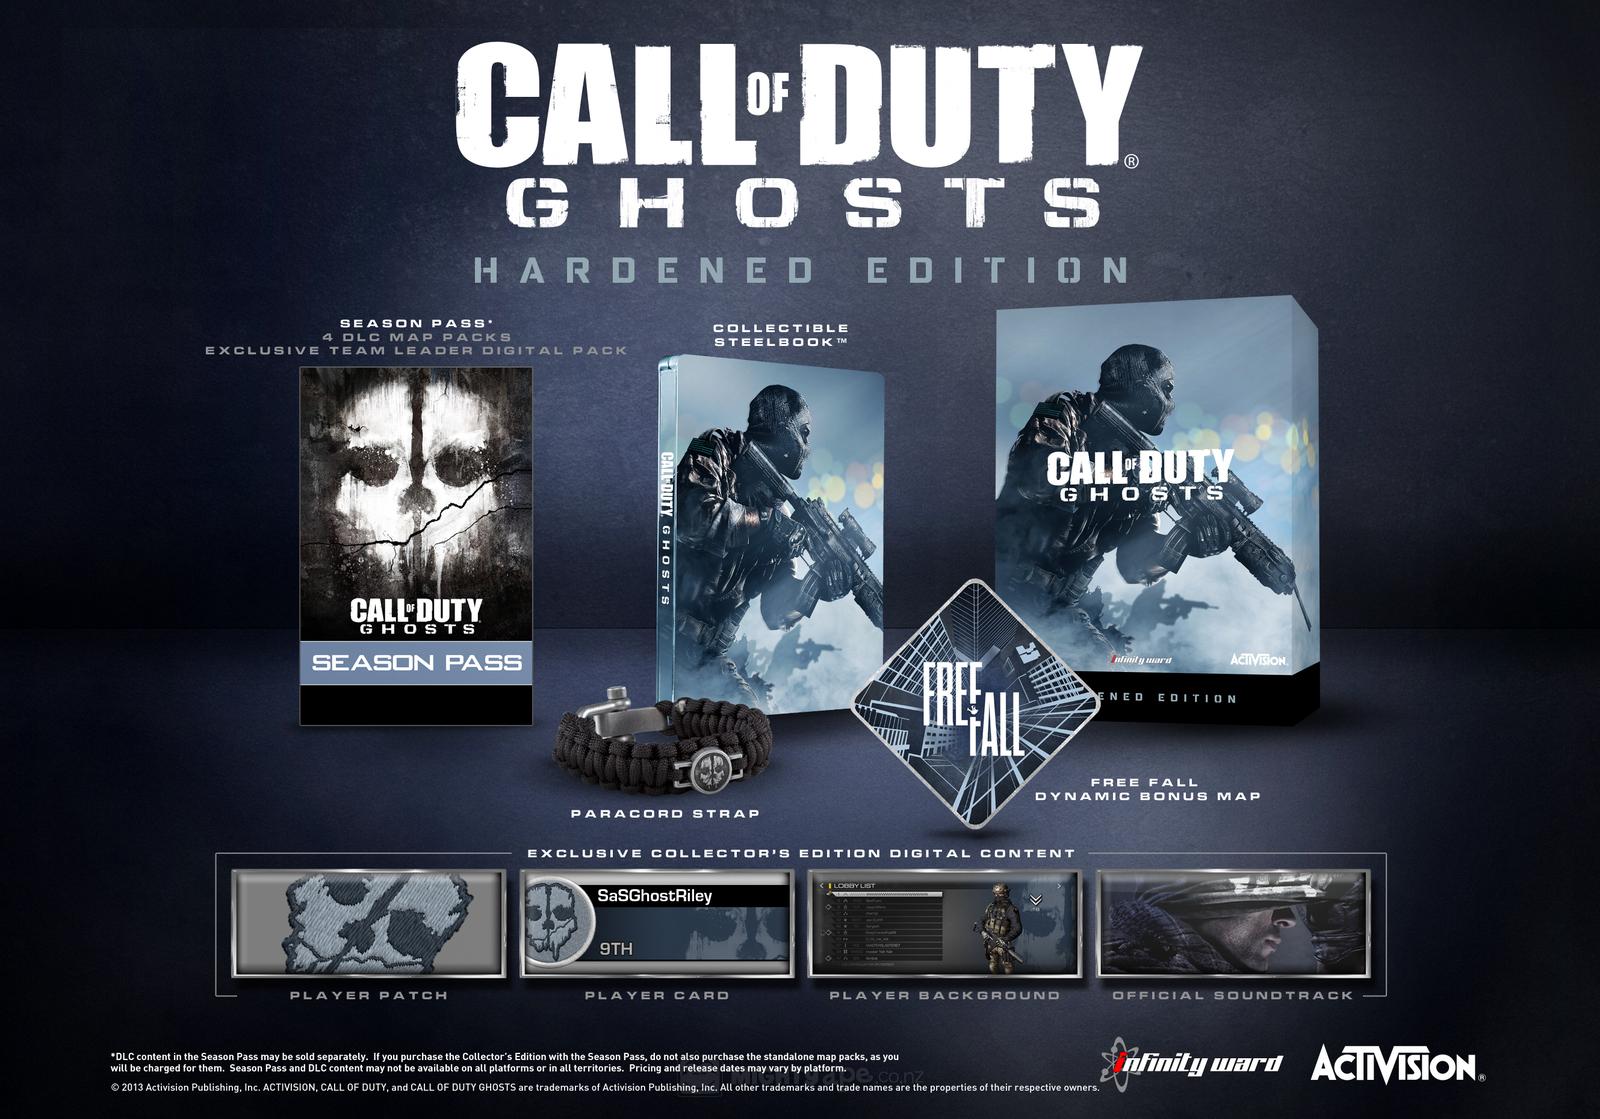 http://images3.wikia.nocookie.net/__cb20131030001540/callofduty/images/2/2b/Ghosts_Hardened_Edition.jpg